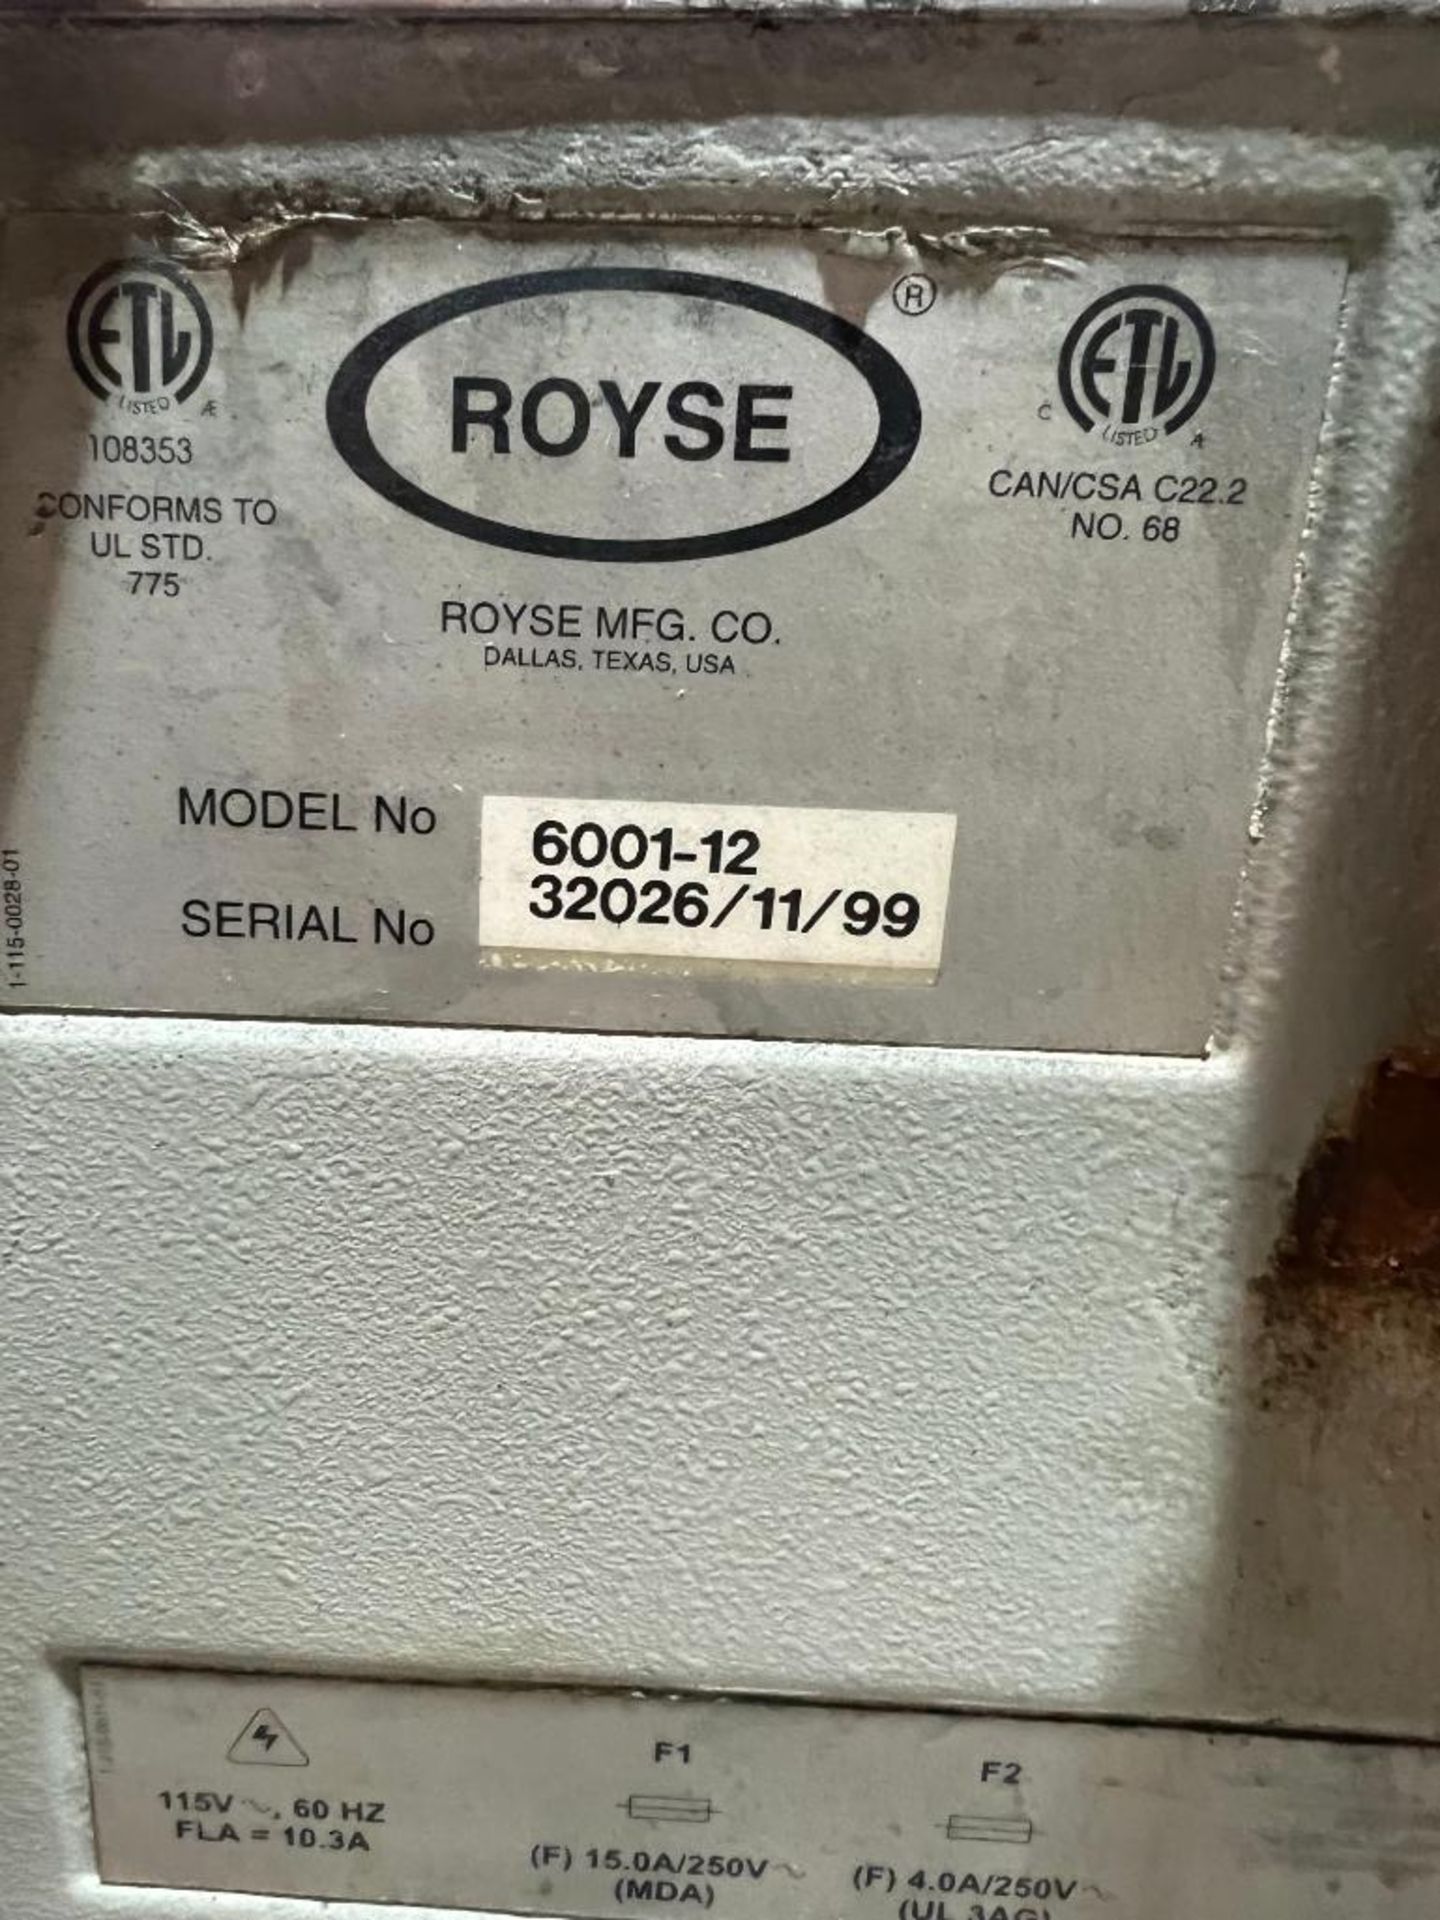 1999, Royse Model 6001-12 Space Saver Circulation System - Image 3 of 3